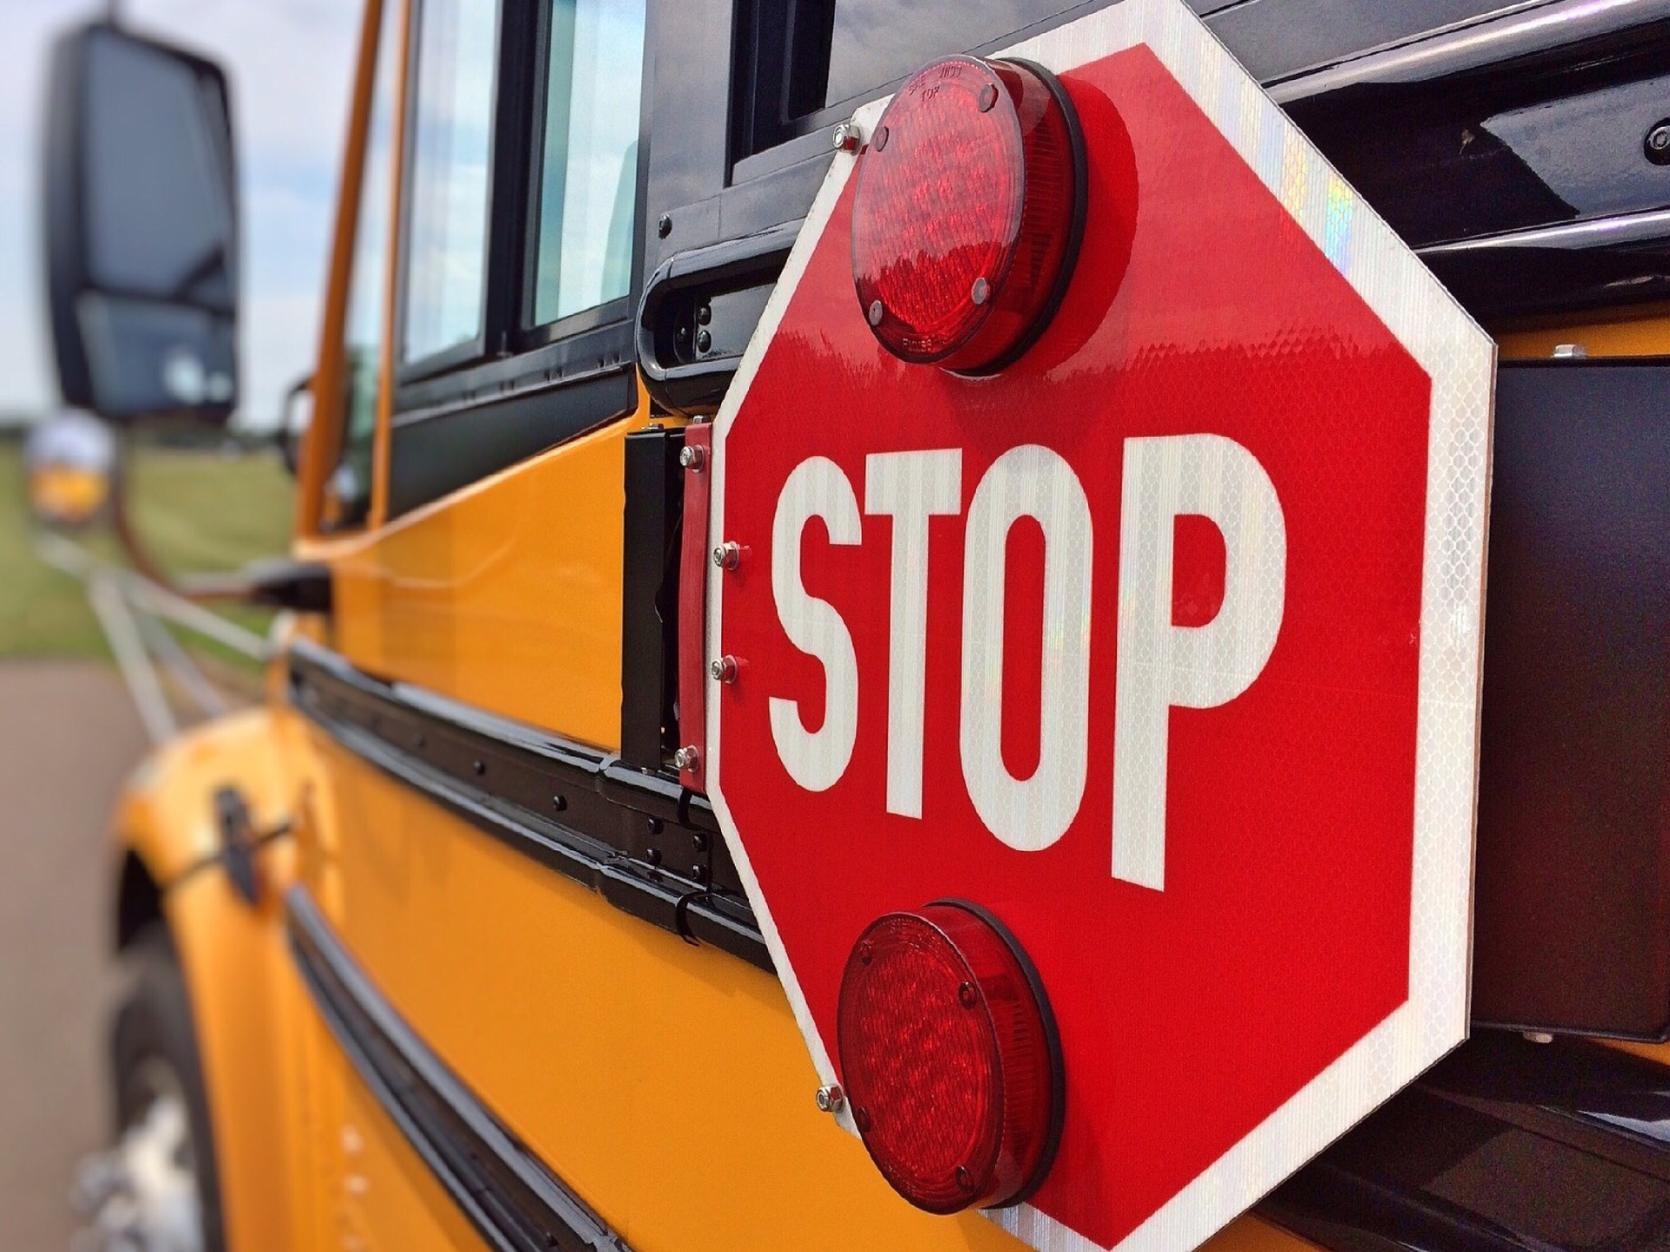 The stop sign on the side of a school bus.